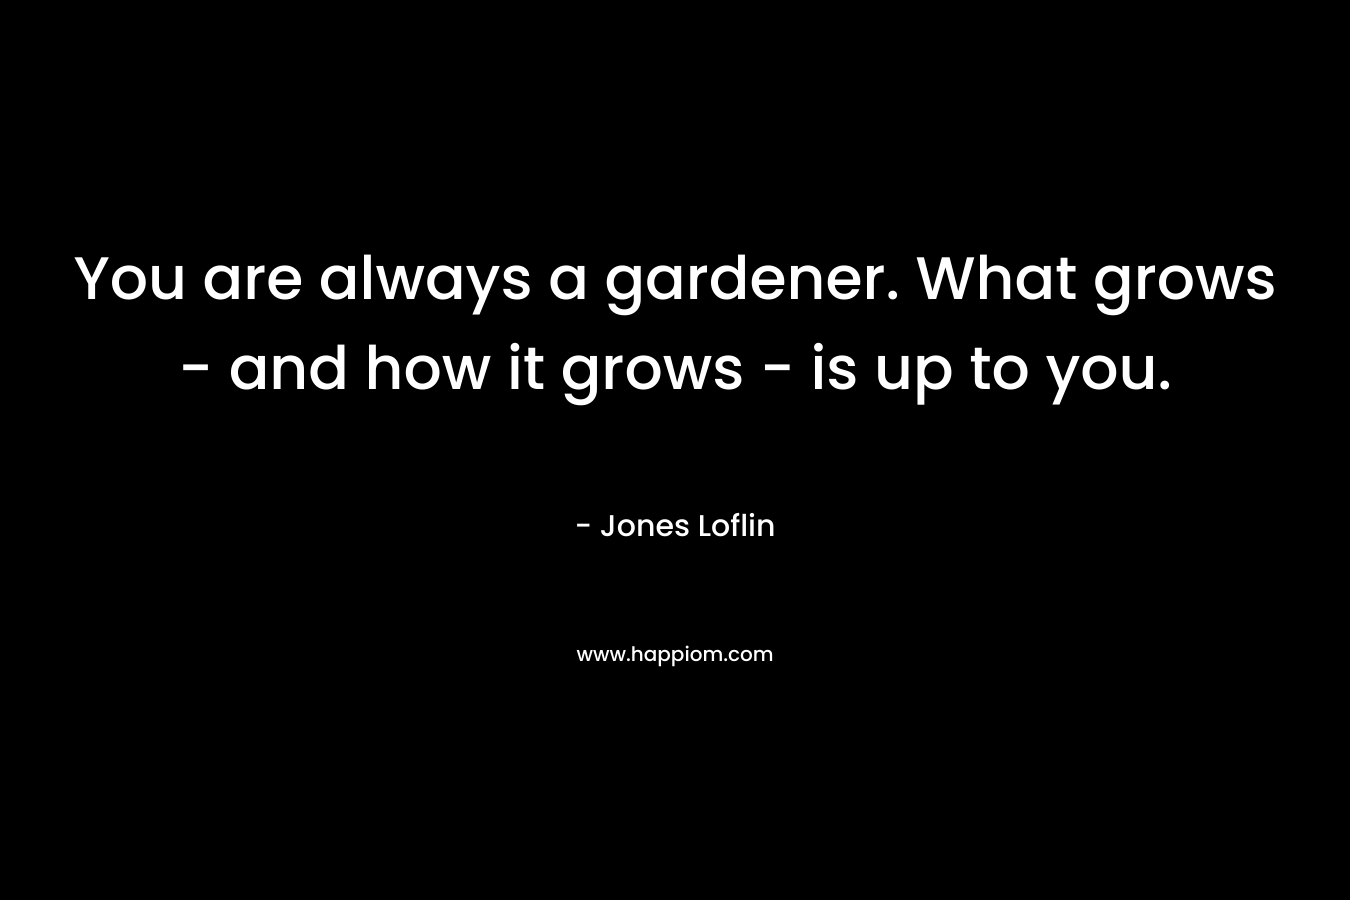 You are always a gardener. What grows - and how it grows - is up to you.